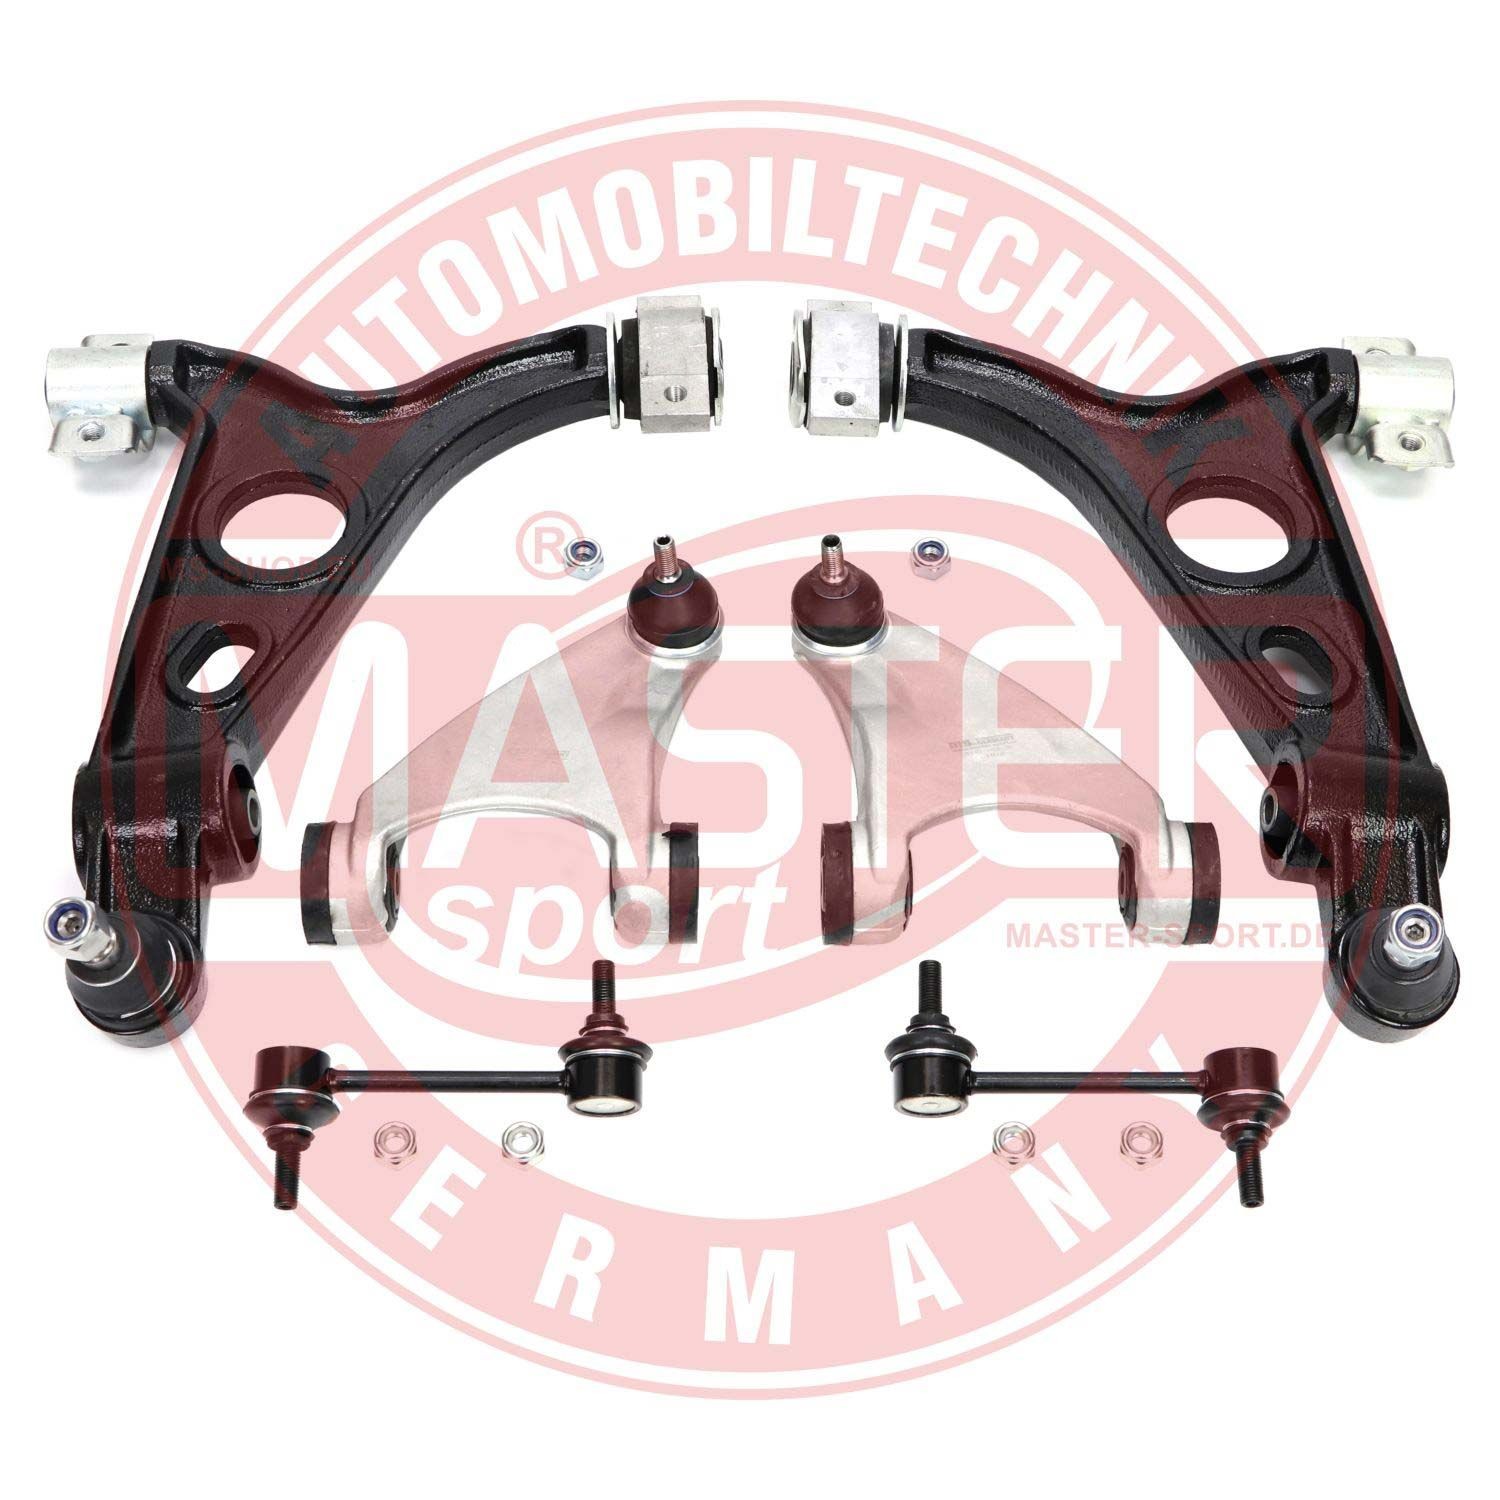 MASTER-SPORT Control arms rear and front Alfa Romeo Spider 105 new 36801/1-SET-MS